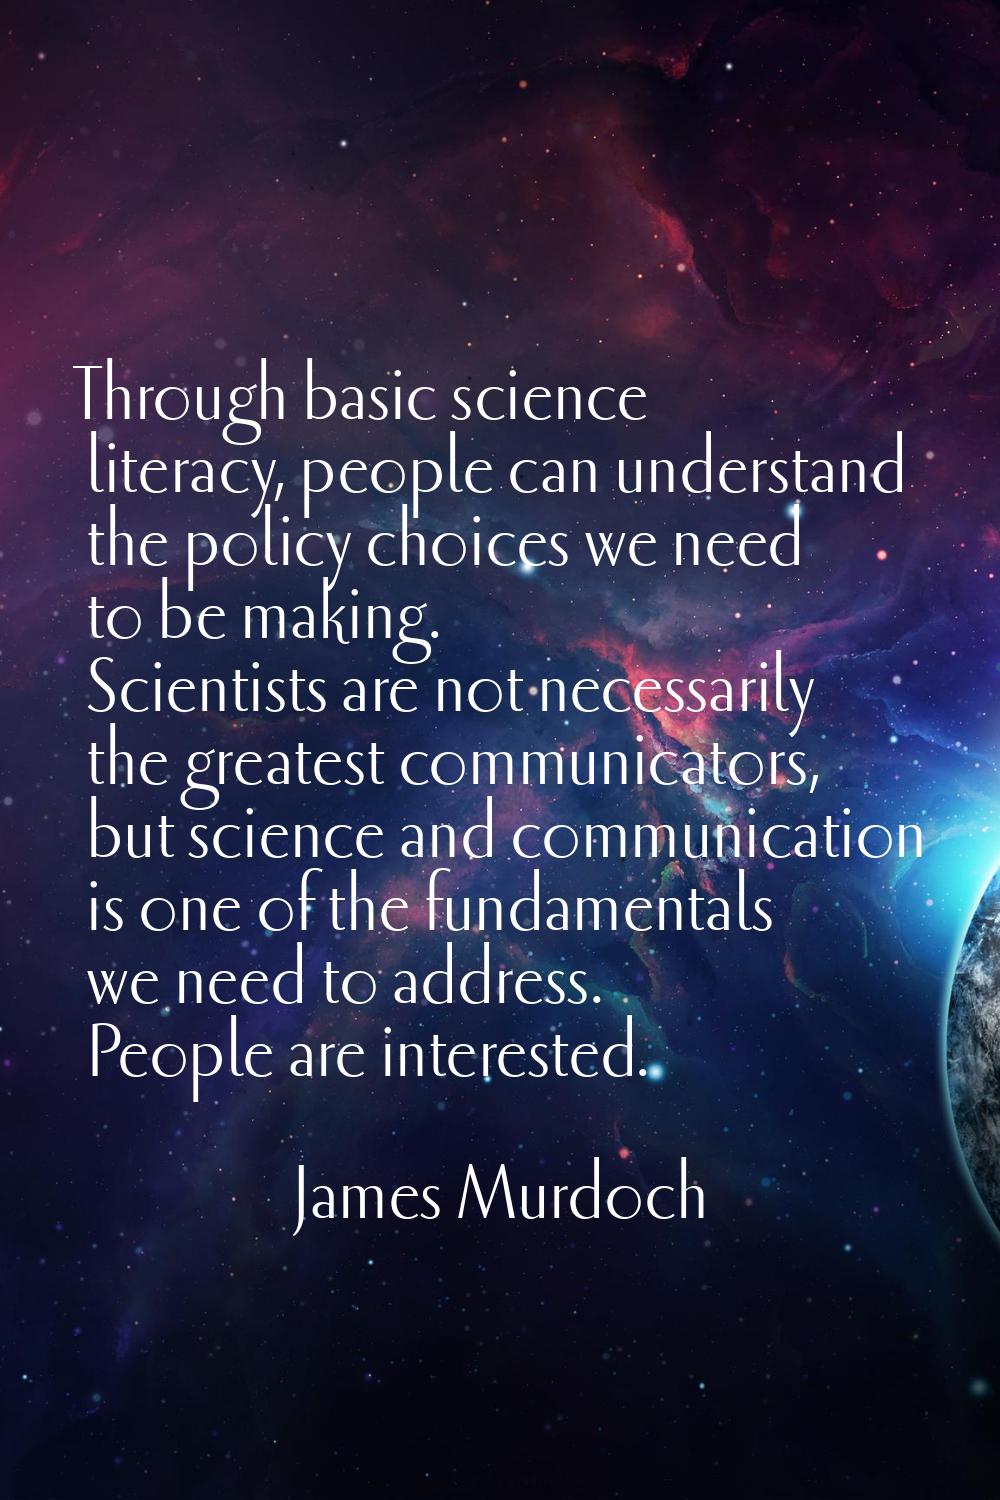 Through basic science literacy, people can understand the policy choices we need to be making. Scie